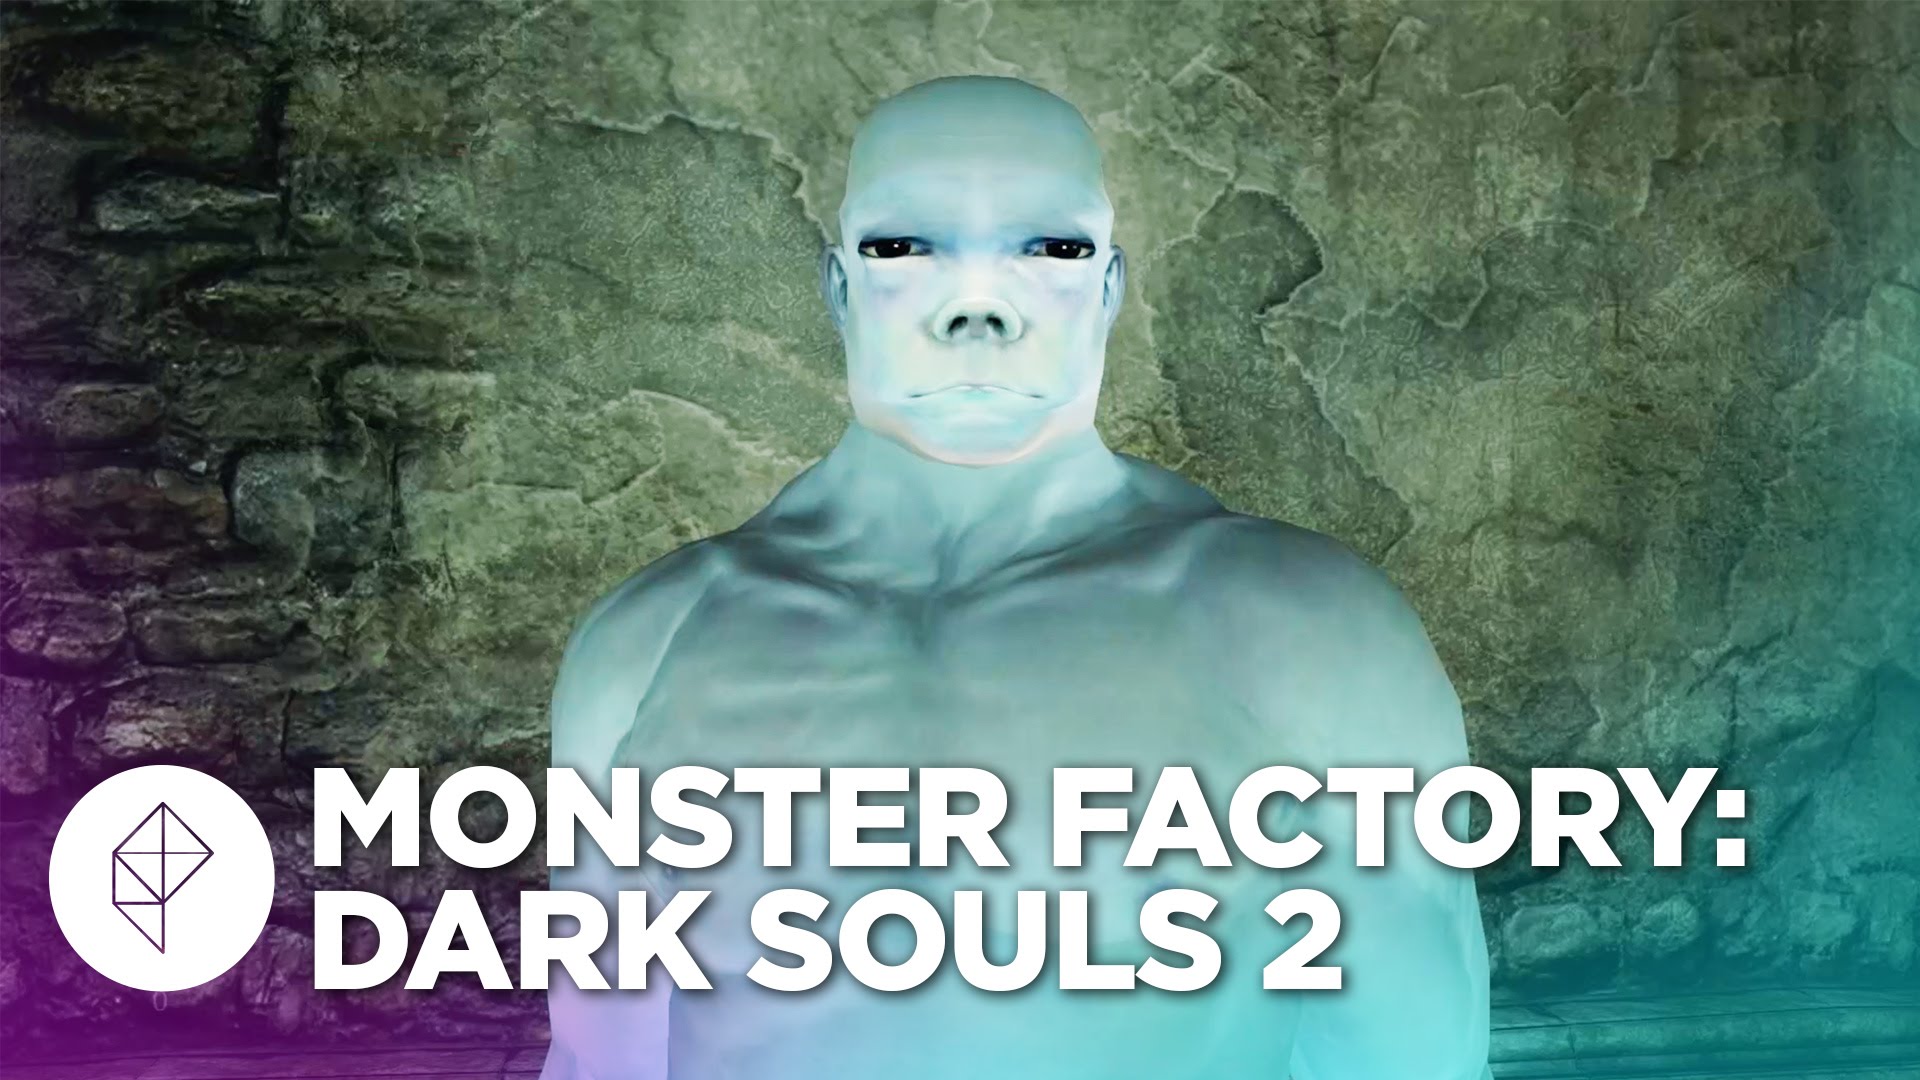 Monster Factory, A Web Series Where Deranged Characters Are Created